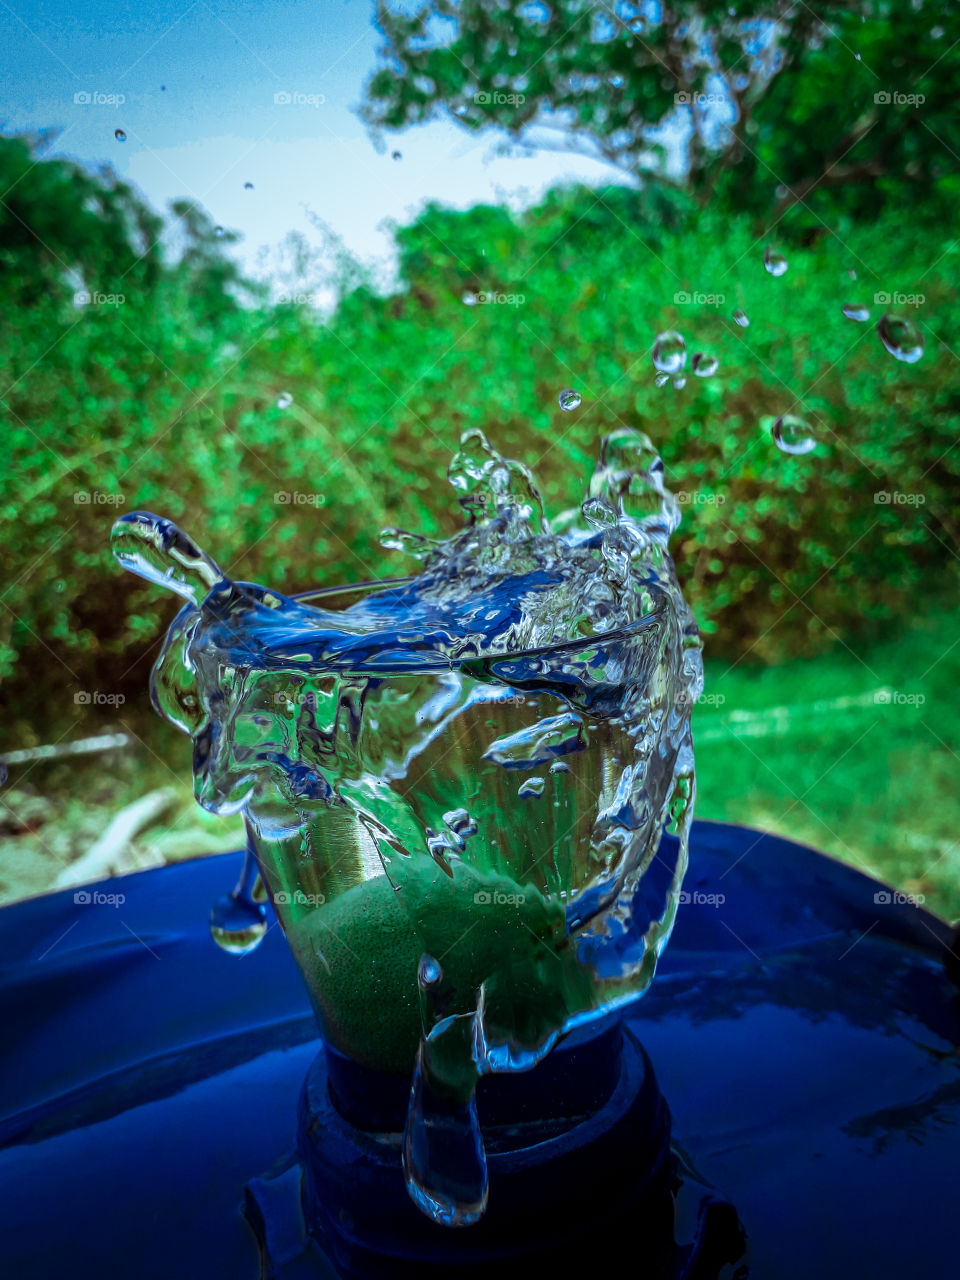 Water splesh Photography Withe A Smartphone 
(This photo 1 smartphone has been clicked from Samsung Galaxy M10, its editing has been done in the Litterroom application.)
Width:2981
Hidth:3974
File size:3.89MB
Maker: Samsung SM-M10SF
Focol Lenght:3.6